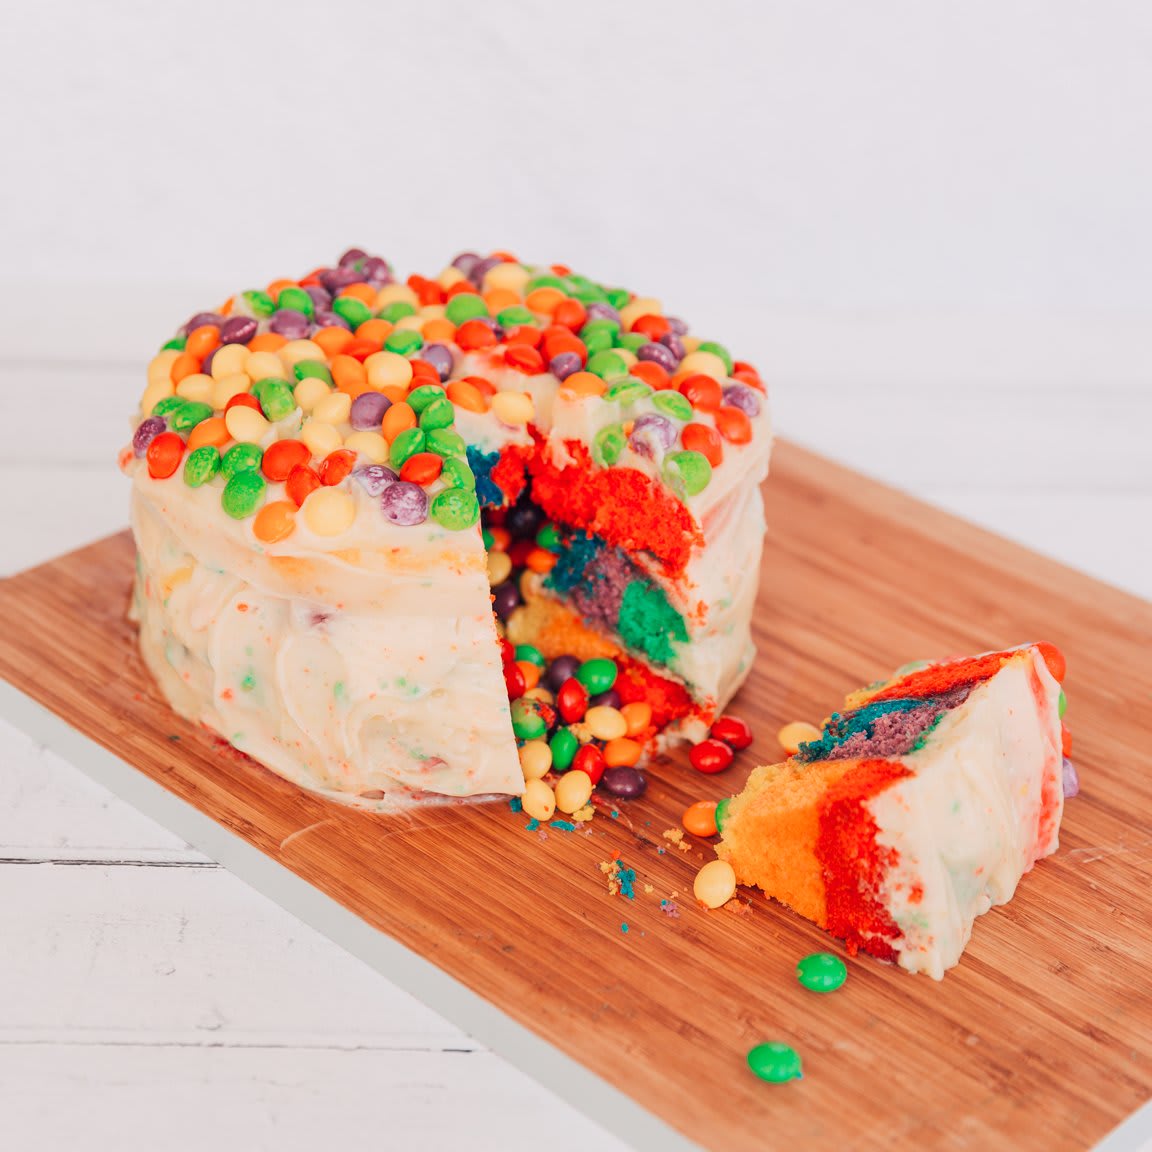 Last week Michael left the bake off tent which meant Hollie got to make us this INSANE "Kids Dream" cake! Packed full of brightly coloured sponge and skittles, we couldn't get enough of this bake 🌈😍 Find all the bake off scores so far here >